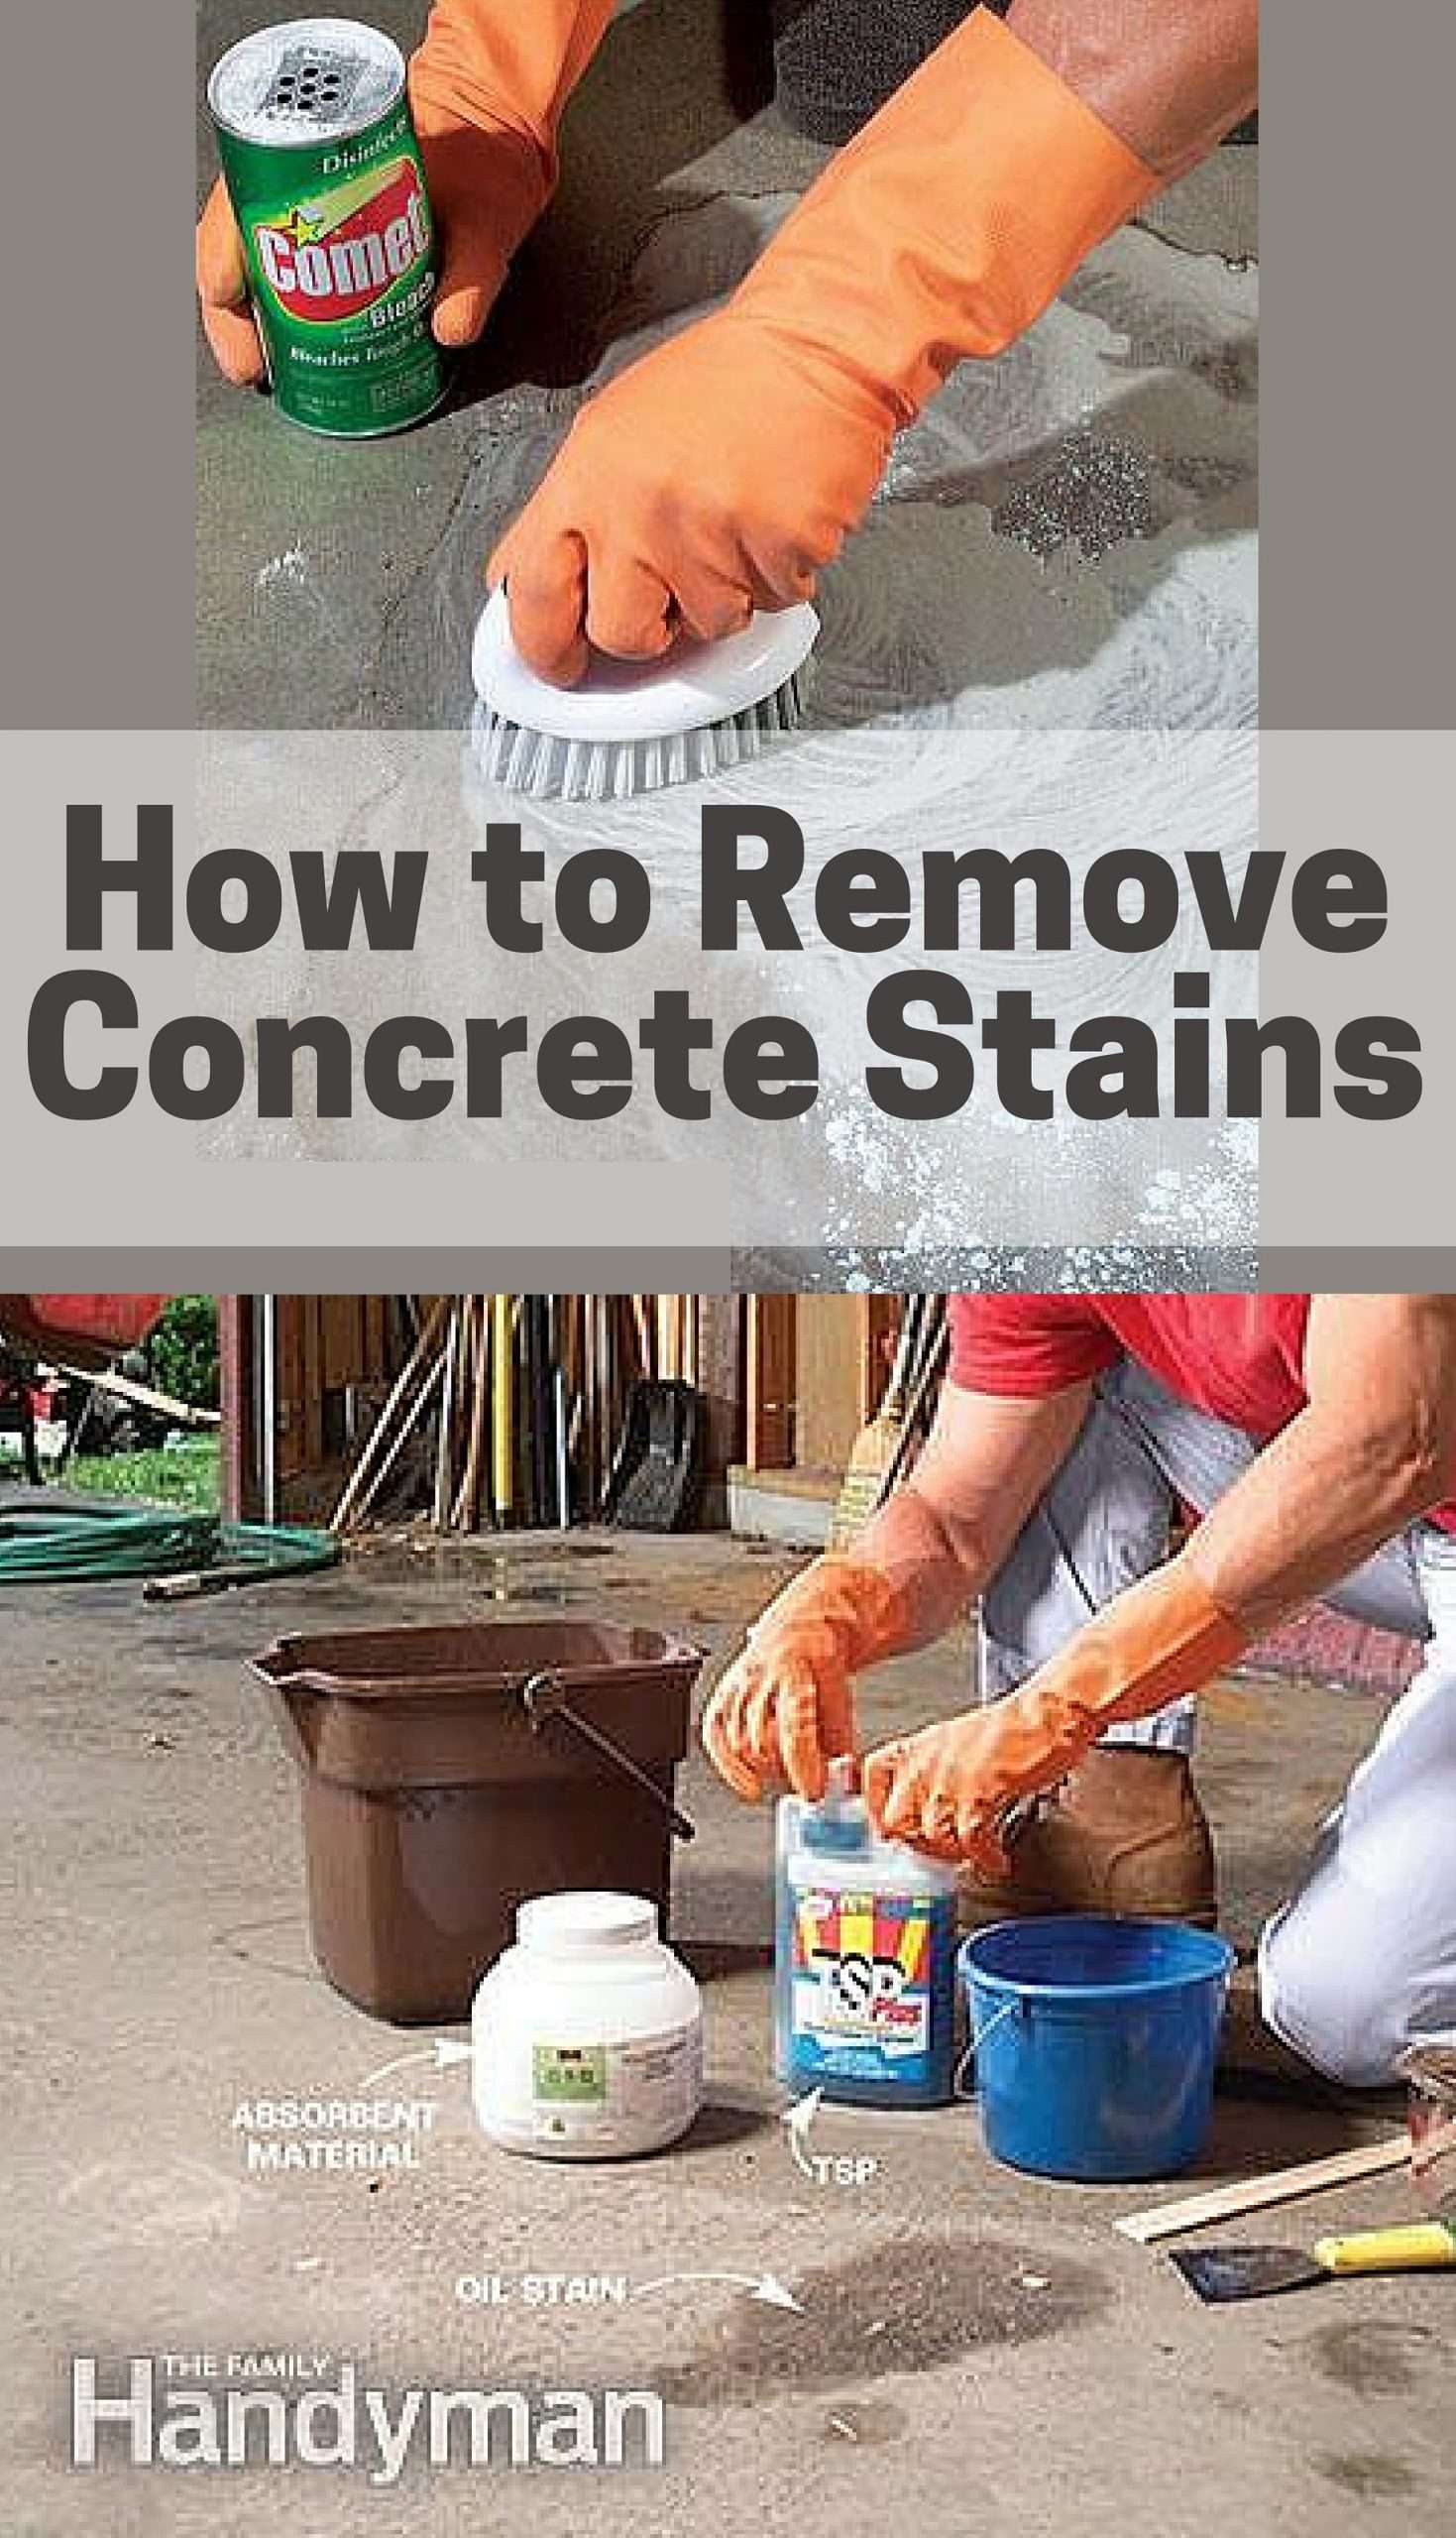 How To Get Wood Stain Off Concrete Patio - LoveMyPatioClub.com